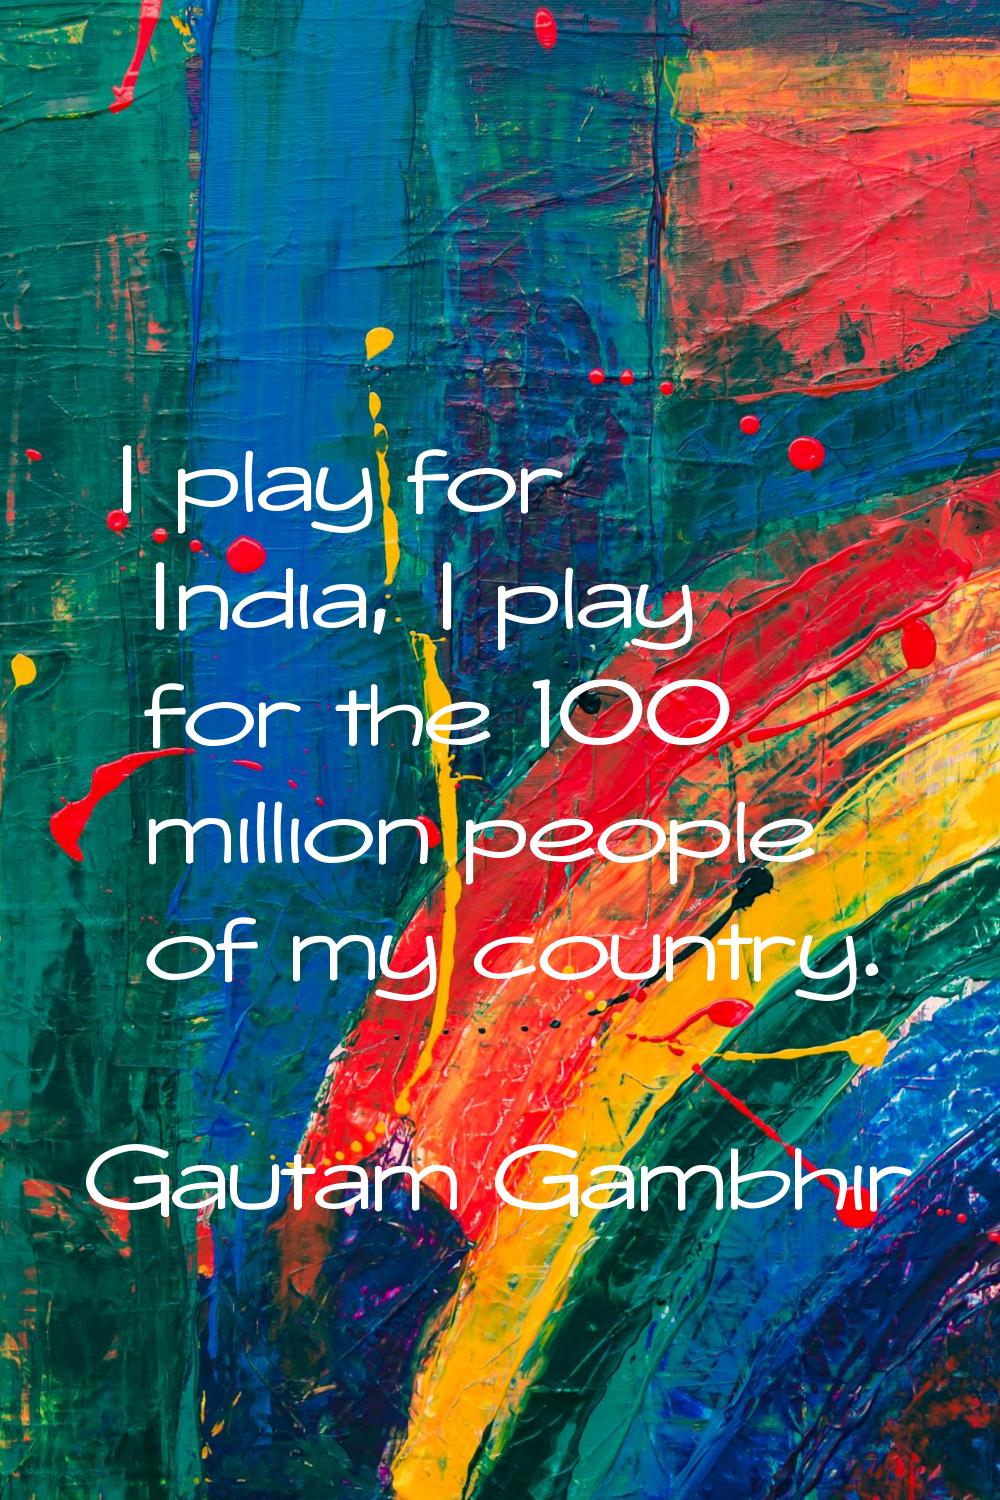 I play for India, I play for the 100 million people of my country.